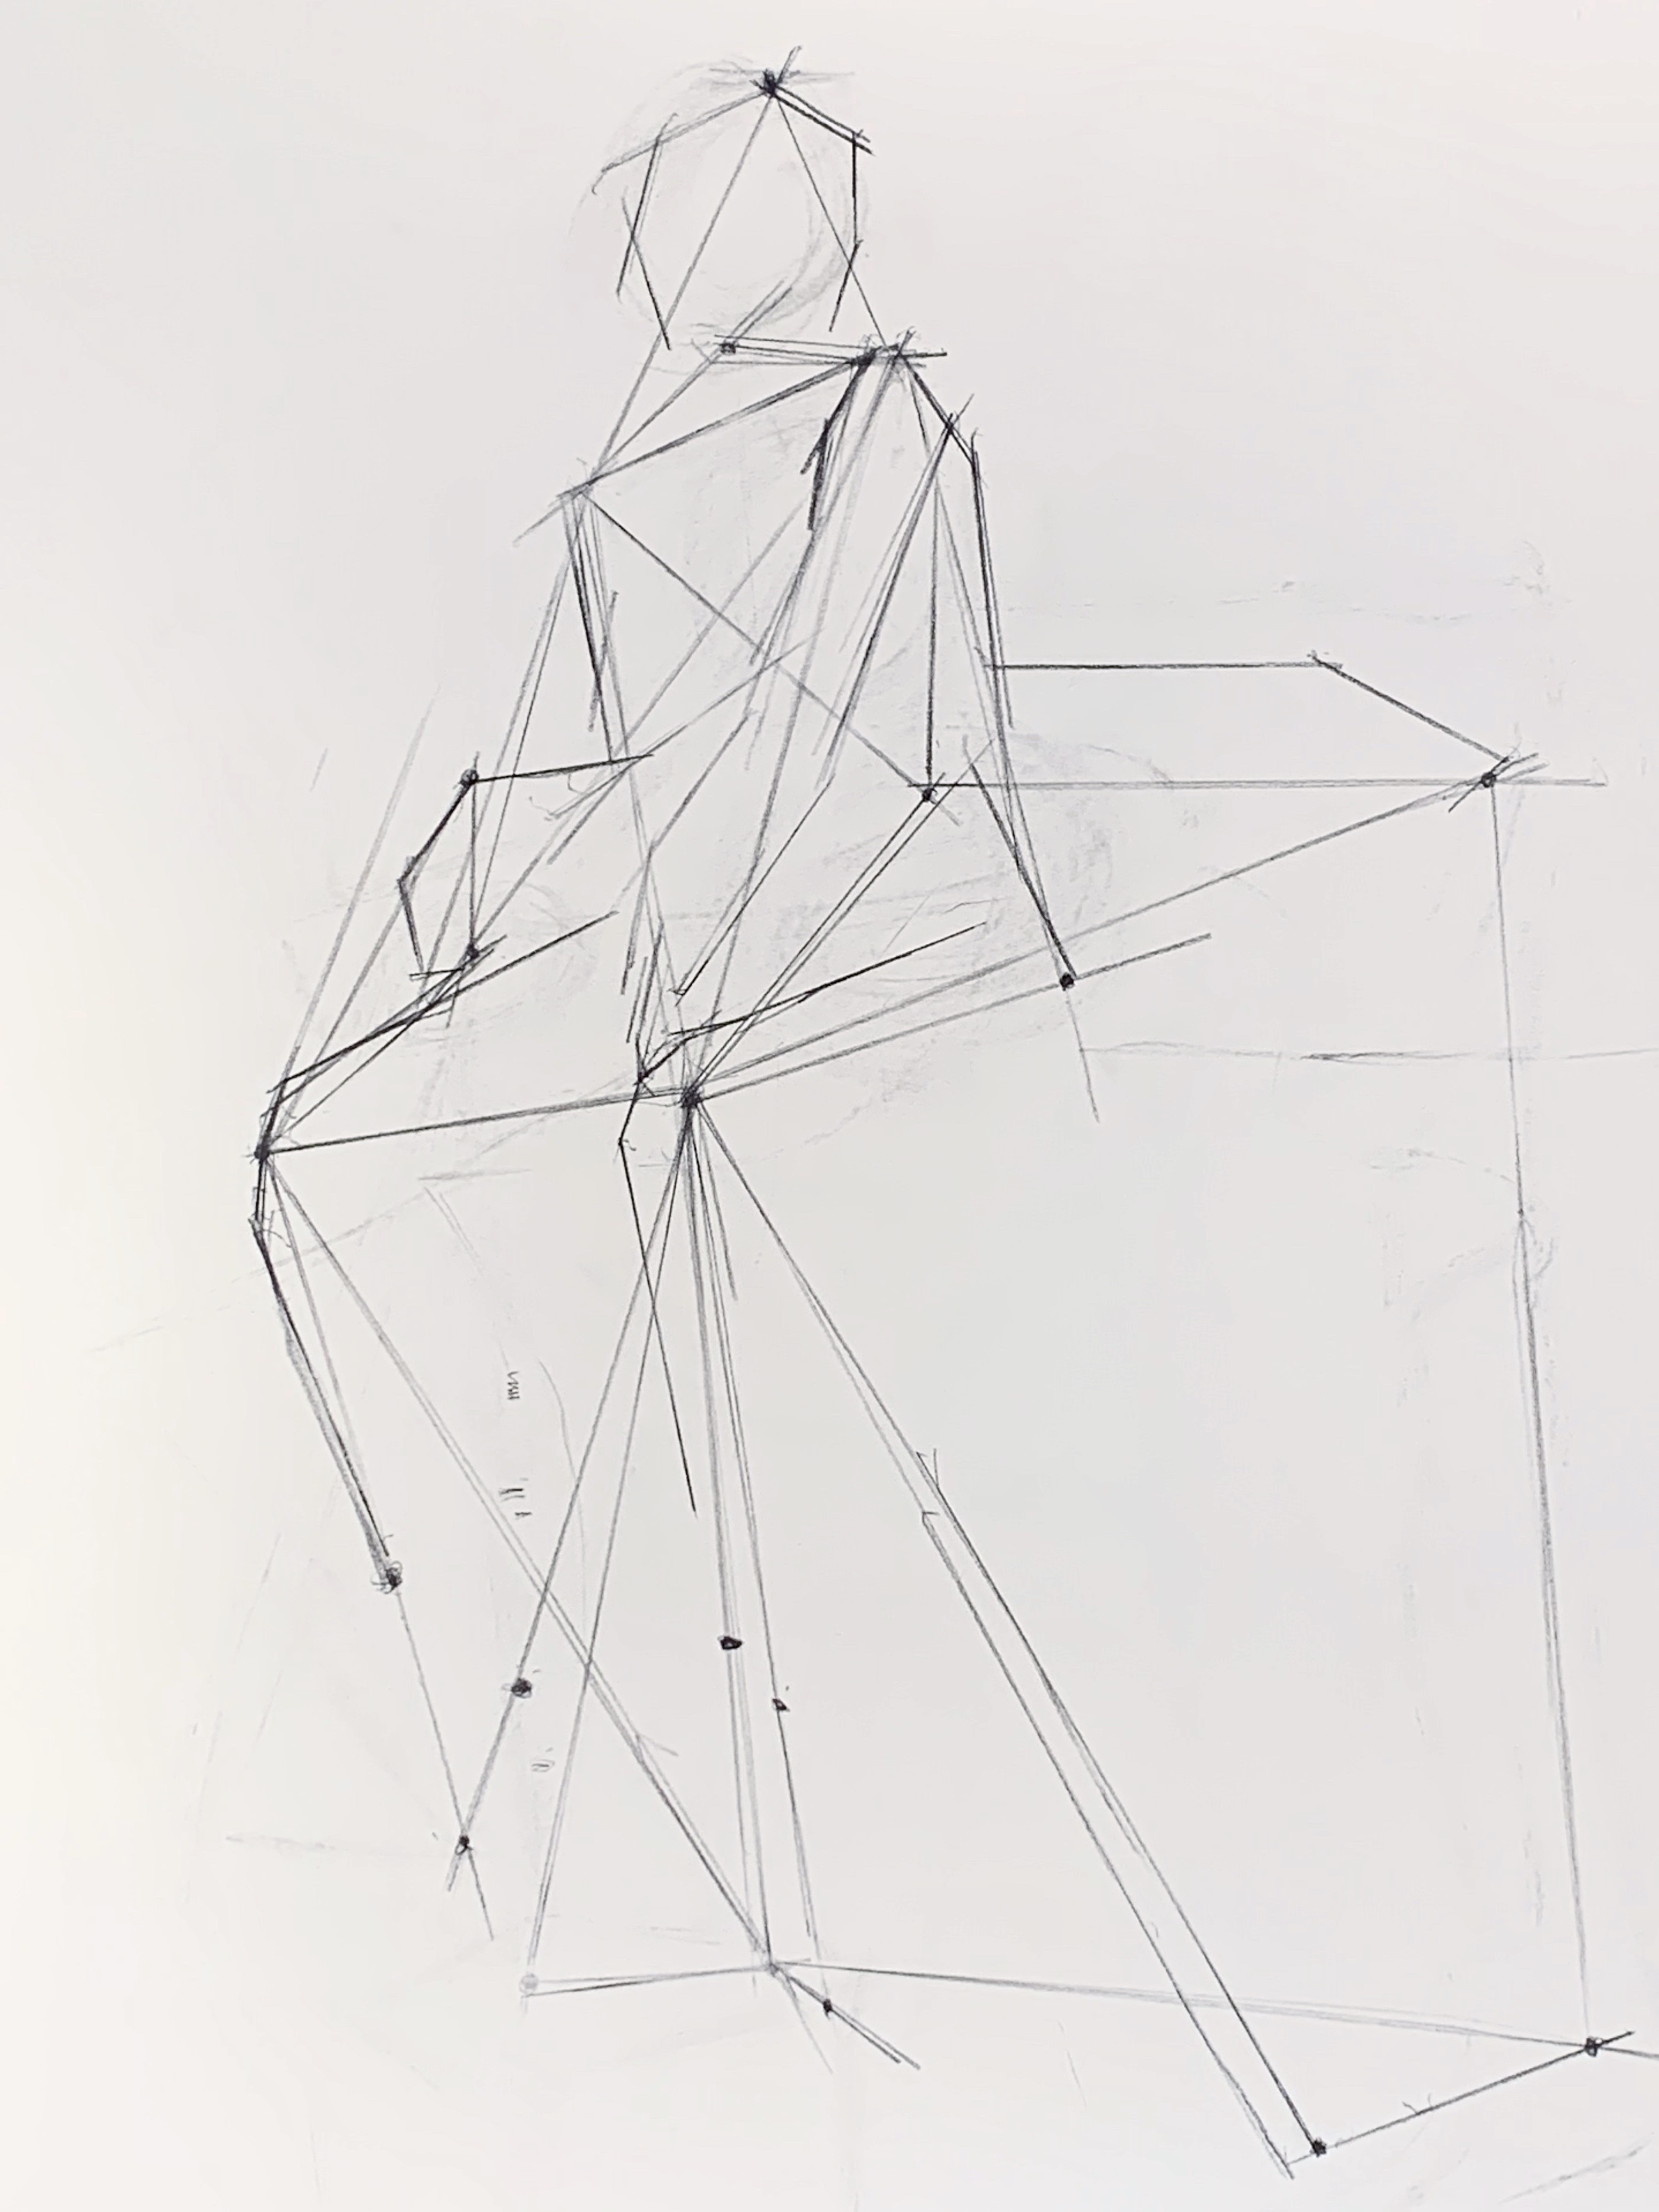 A drawing composed of several lines, outlining the gesture figure of a human- including angles, proportions, and spatial relationships, drawn in vine charcoal.